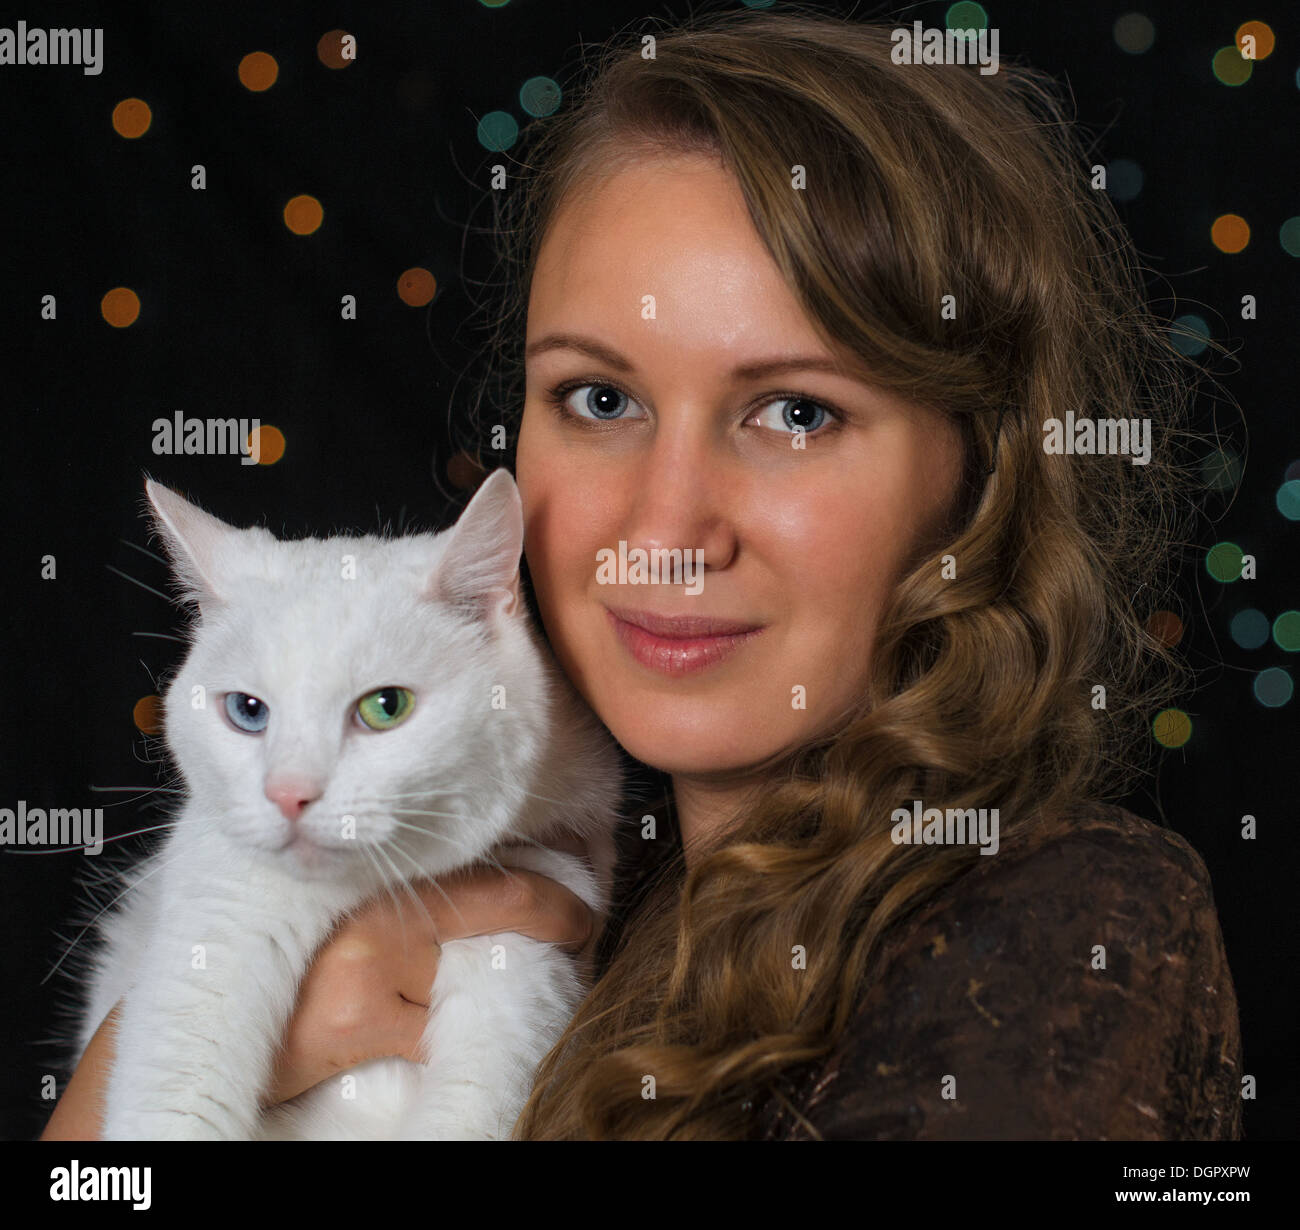 Woman and white cat portrait over bokeh Stock Photo